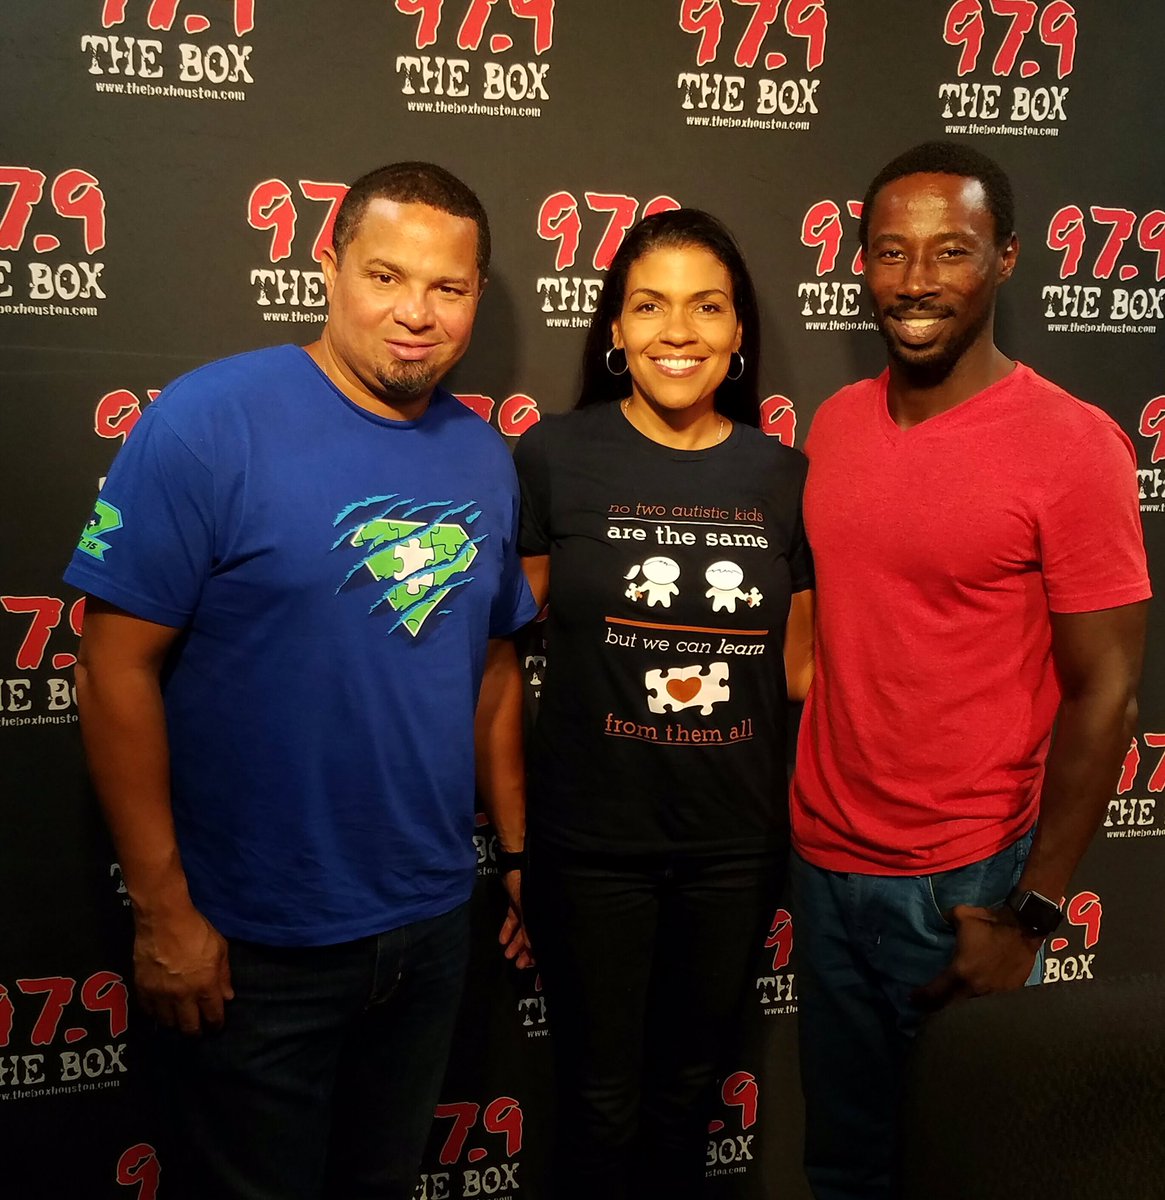 @AhmadCG and @debislam speaking about the Walk for Autism in HOU on 9/18 on @979TheBox w/ @iKGSmooth @autismspeaks